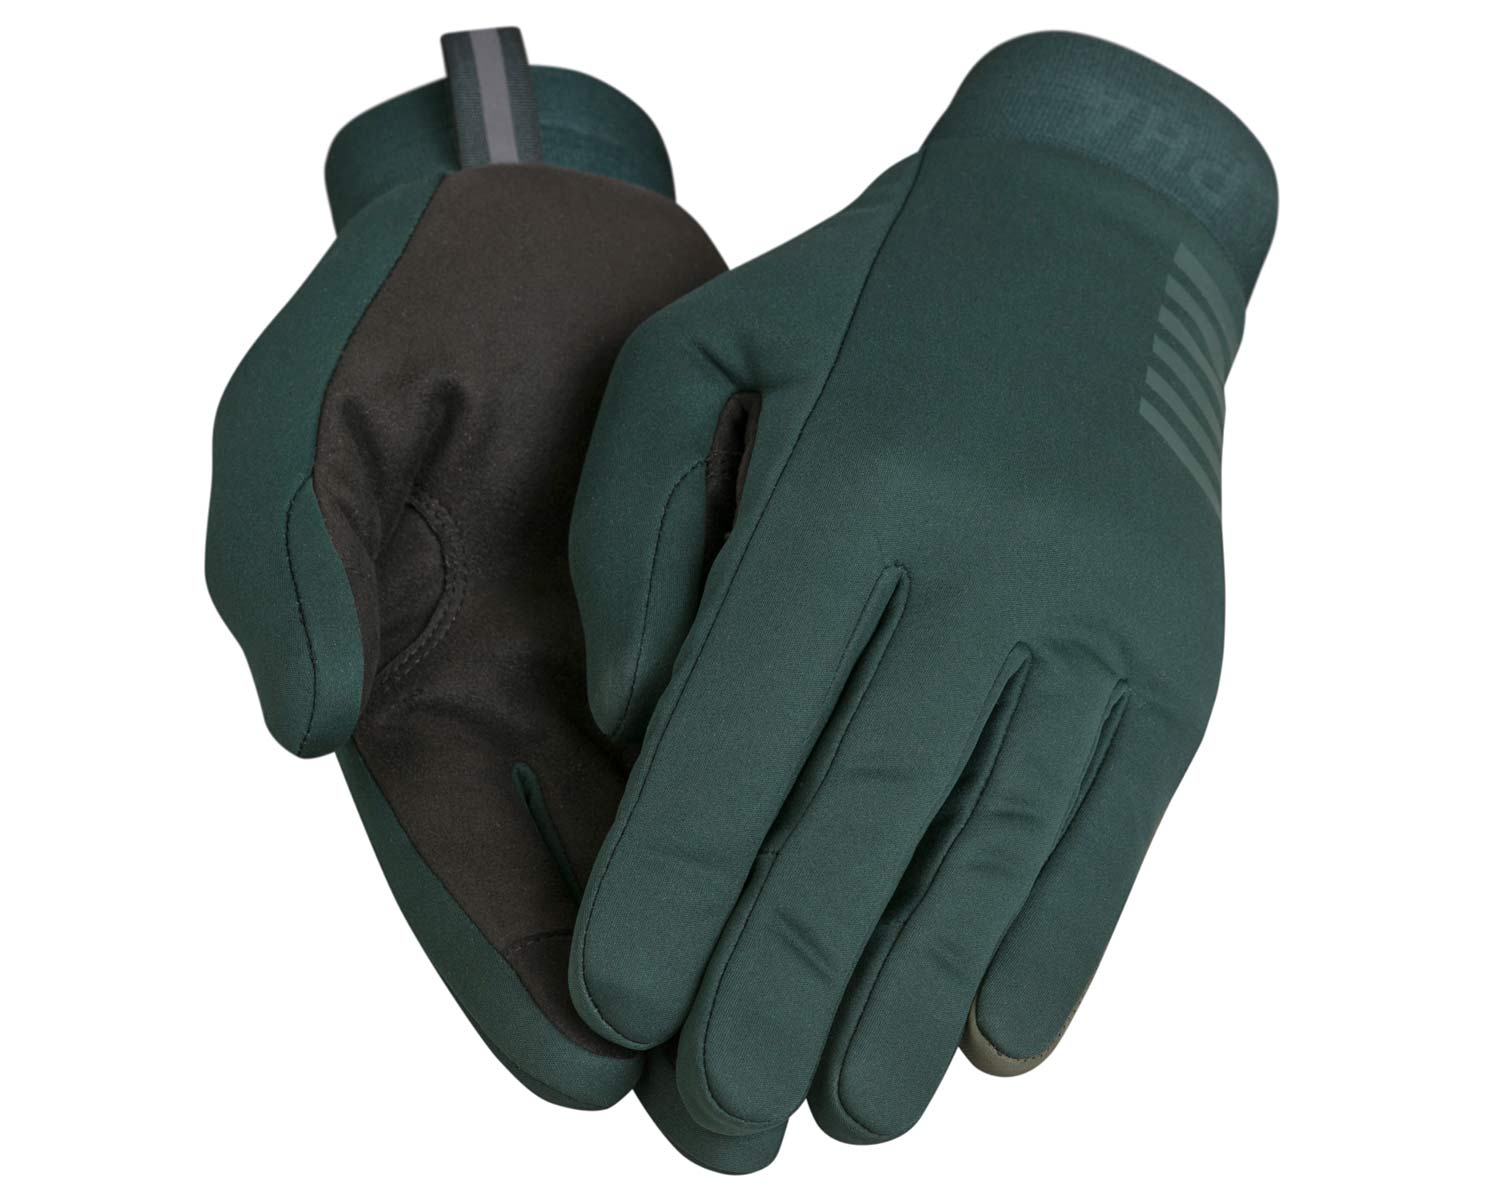 Rapha Pro Team Winter road riding racing training collection, Pro Team Gloves detail